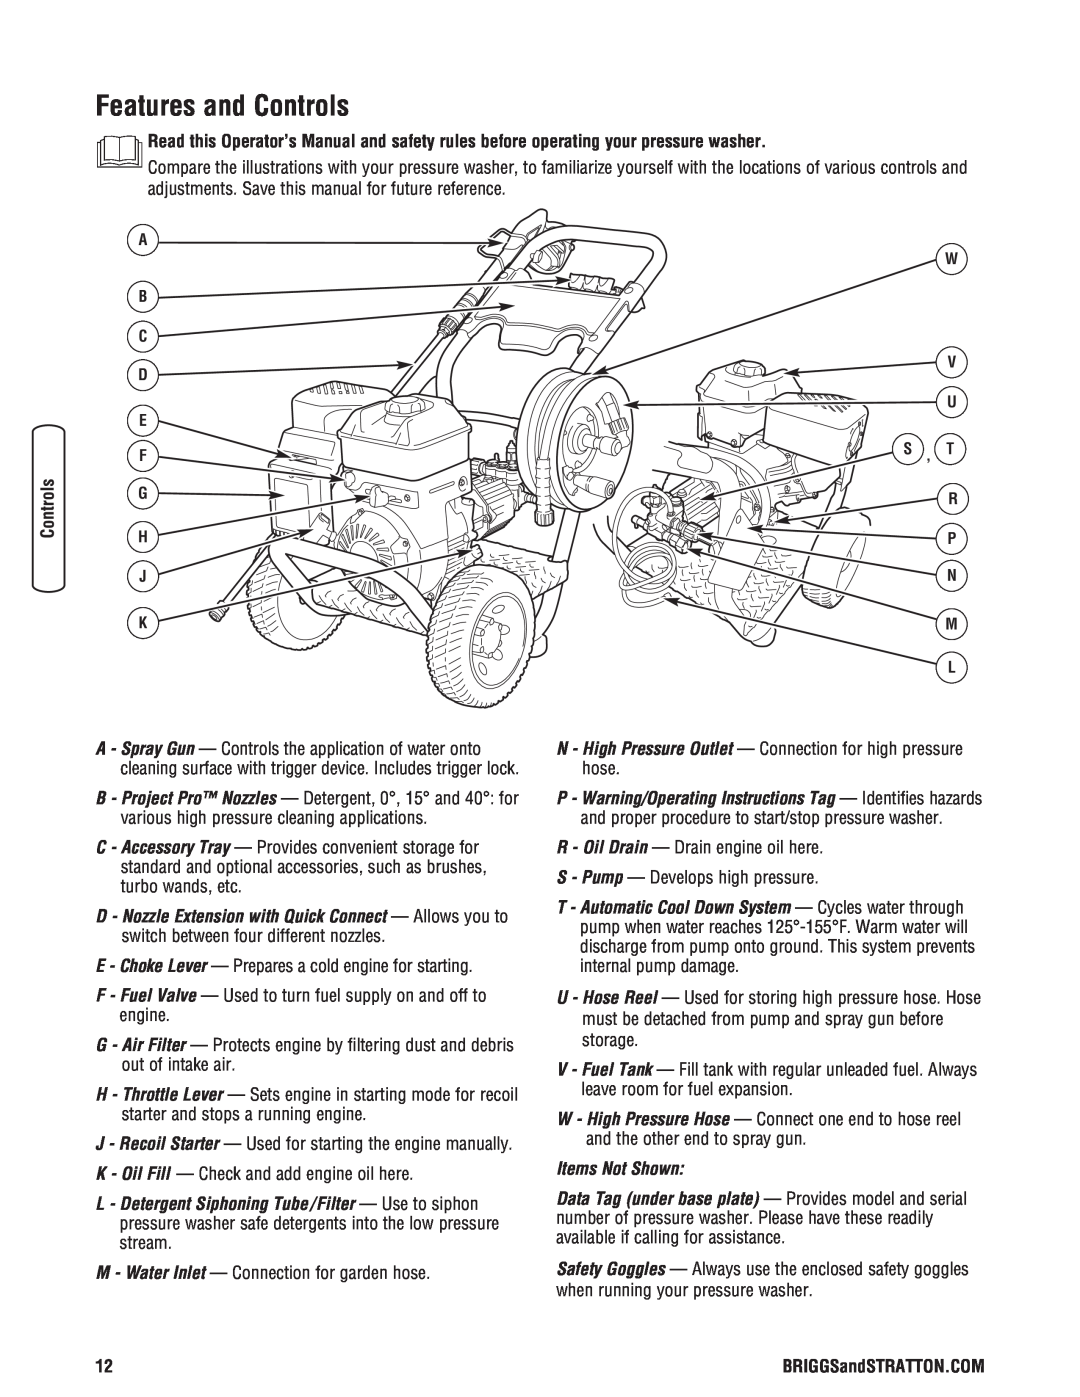 Briggs & Stratton 020364-0 manual Features and Controls 